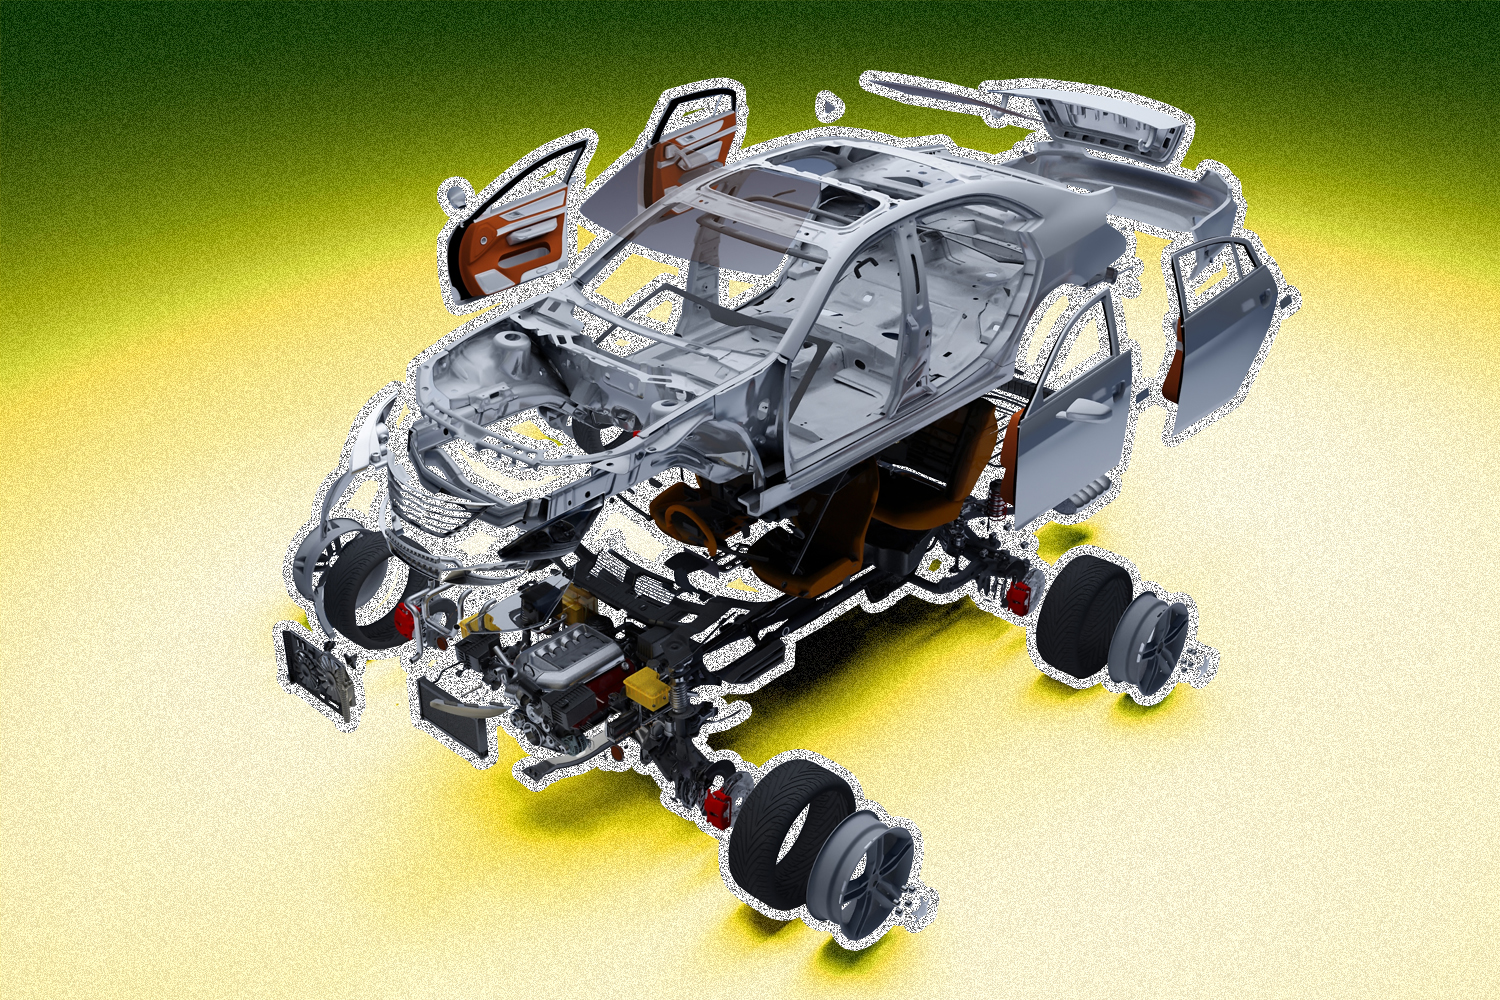 Image of a car model with parts